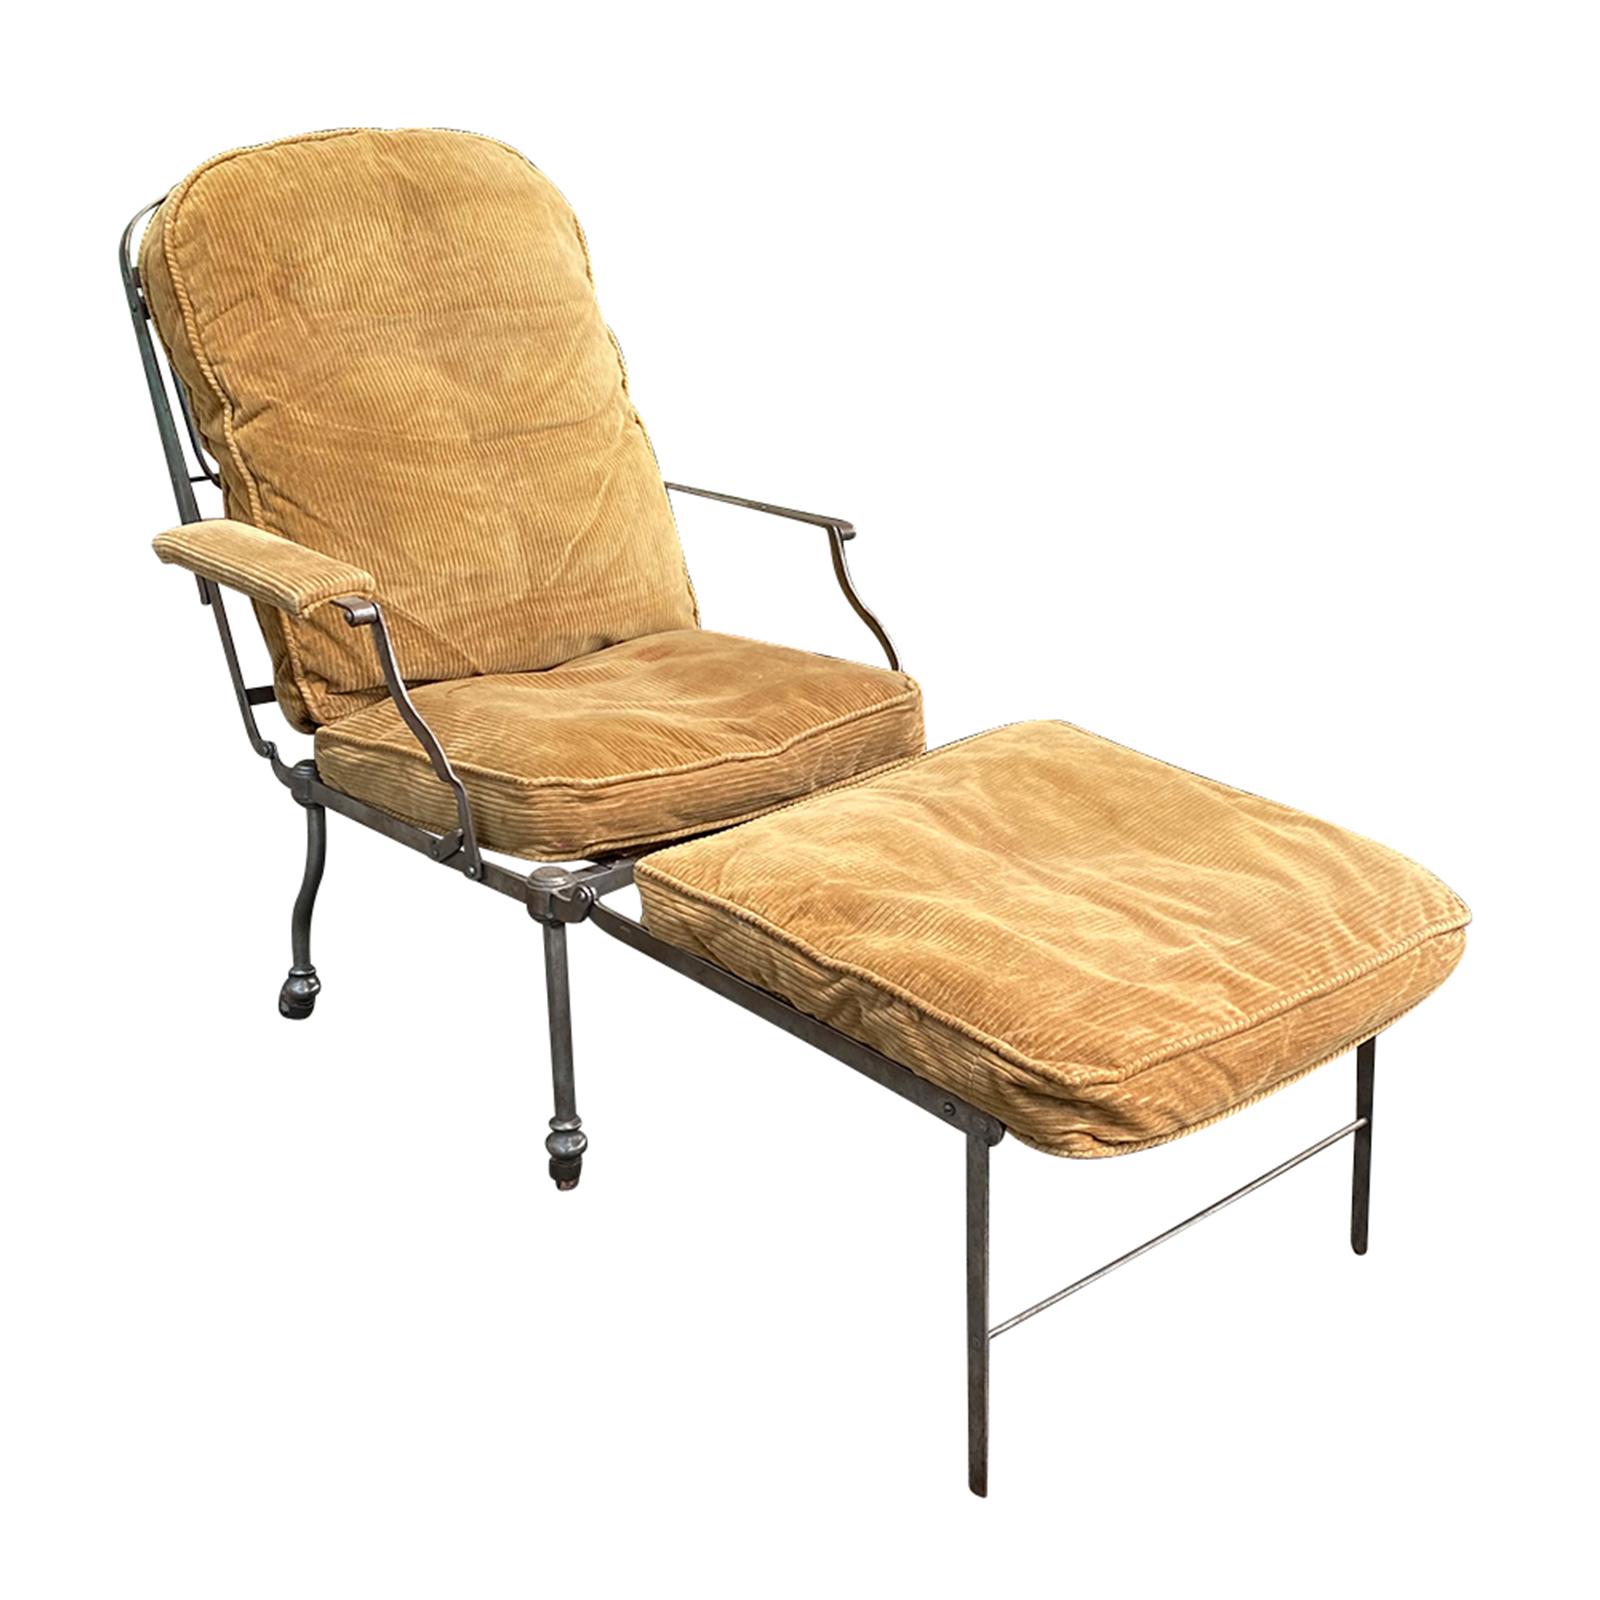 Late 19th Century Steel Adjustable Lounge Chair / Chaise